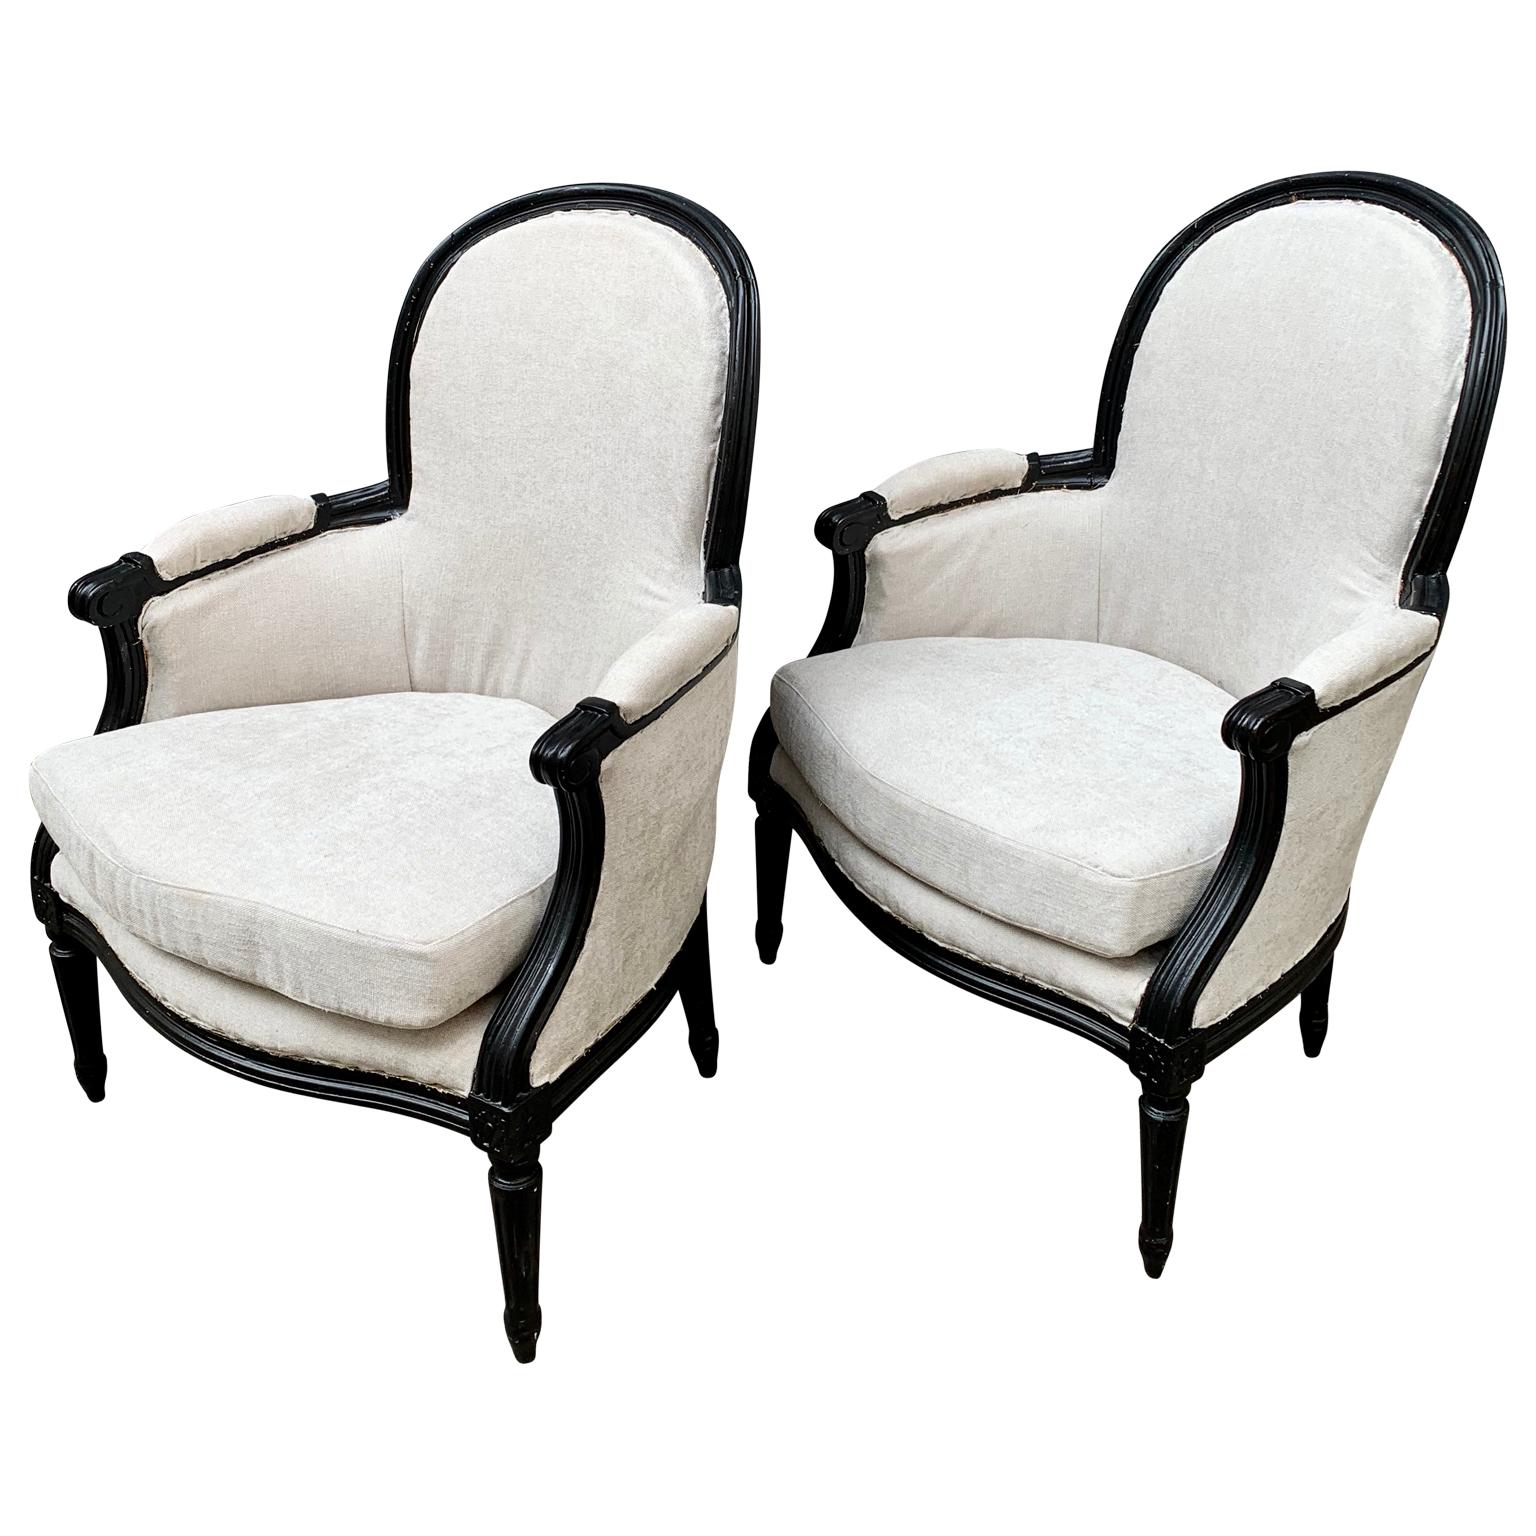 Hand-Painted Pair of French Black Painted Louis XVI Styler Bergère Armchairs